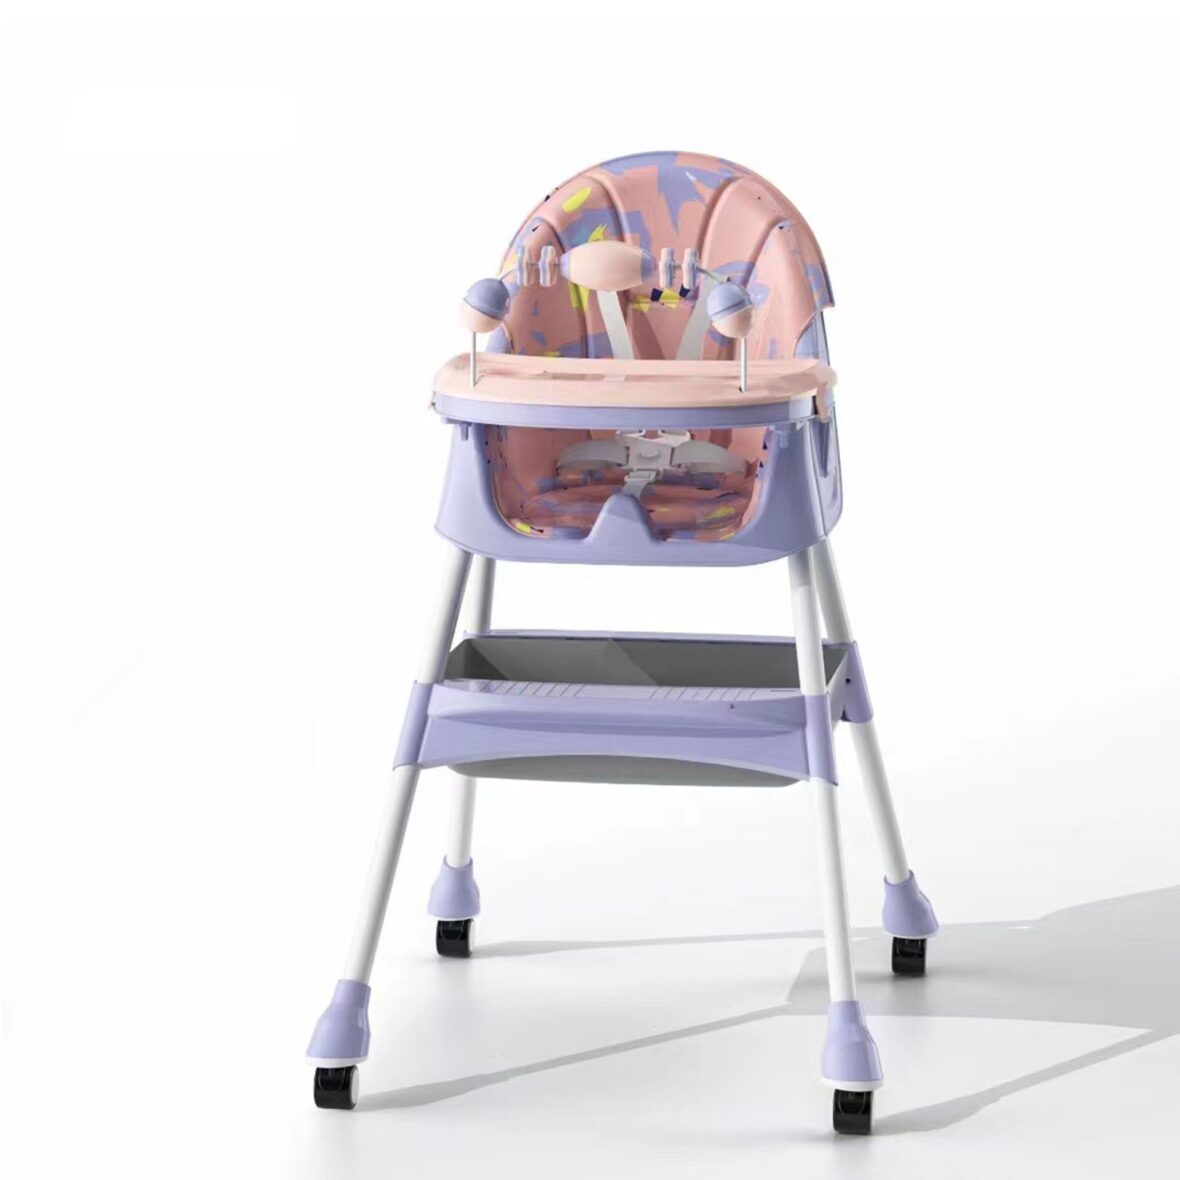 Infantes 4 in 1 Baby High Chair Foldable With Adjustable Legs Feeding Tray (3)